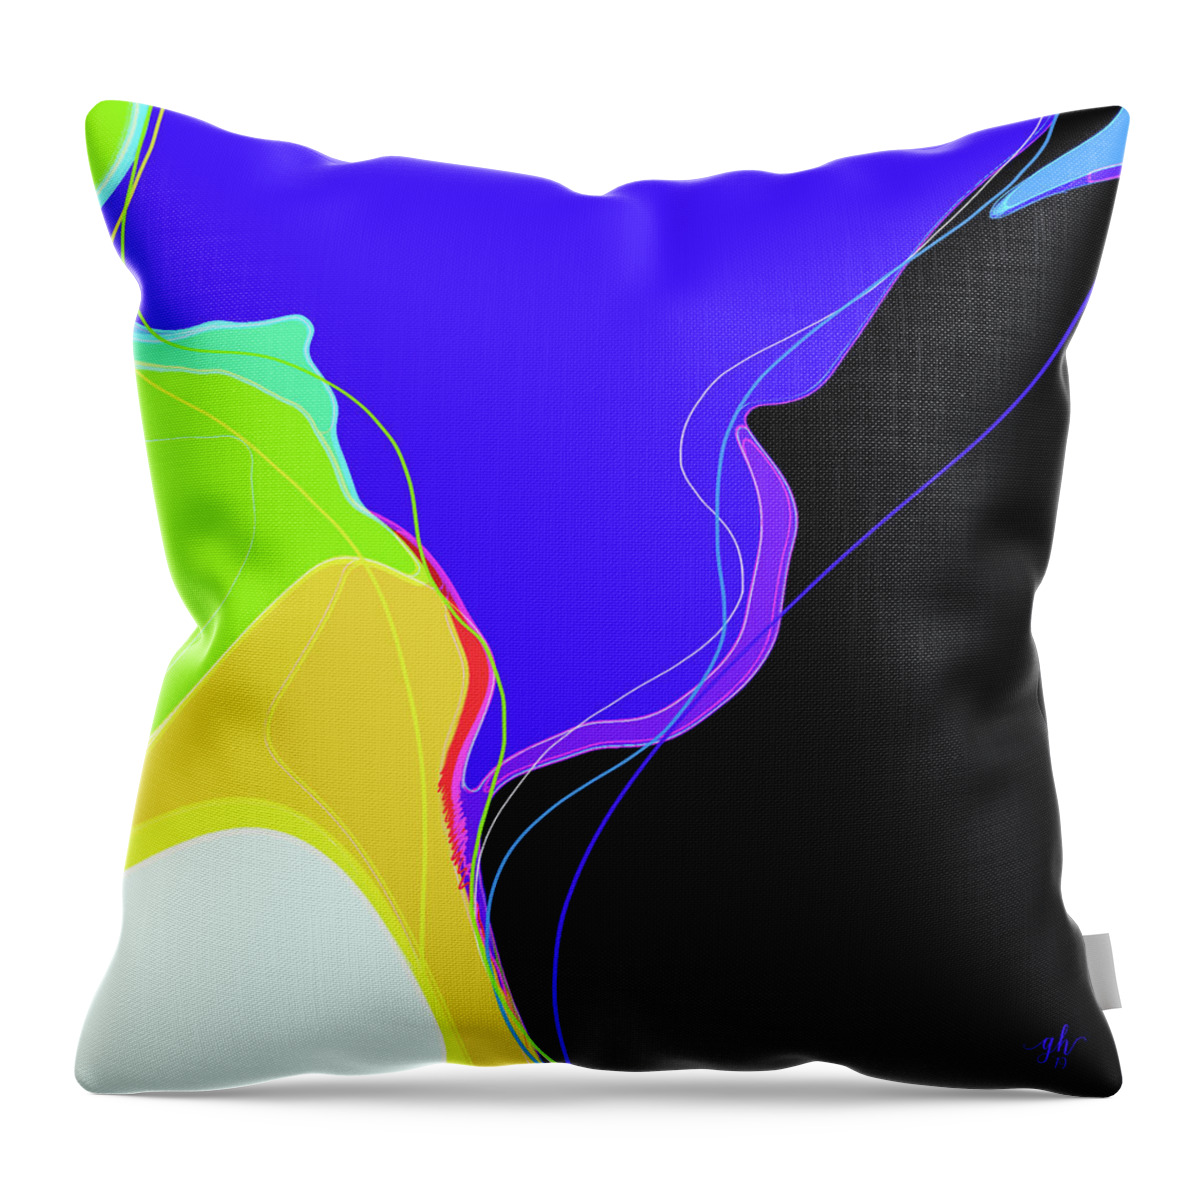 #abstract #colorblocks #whimsy #folly #child'splay Throw Pillow featuring the digital art Kite Strings by Gina Harrison